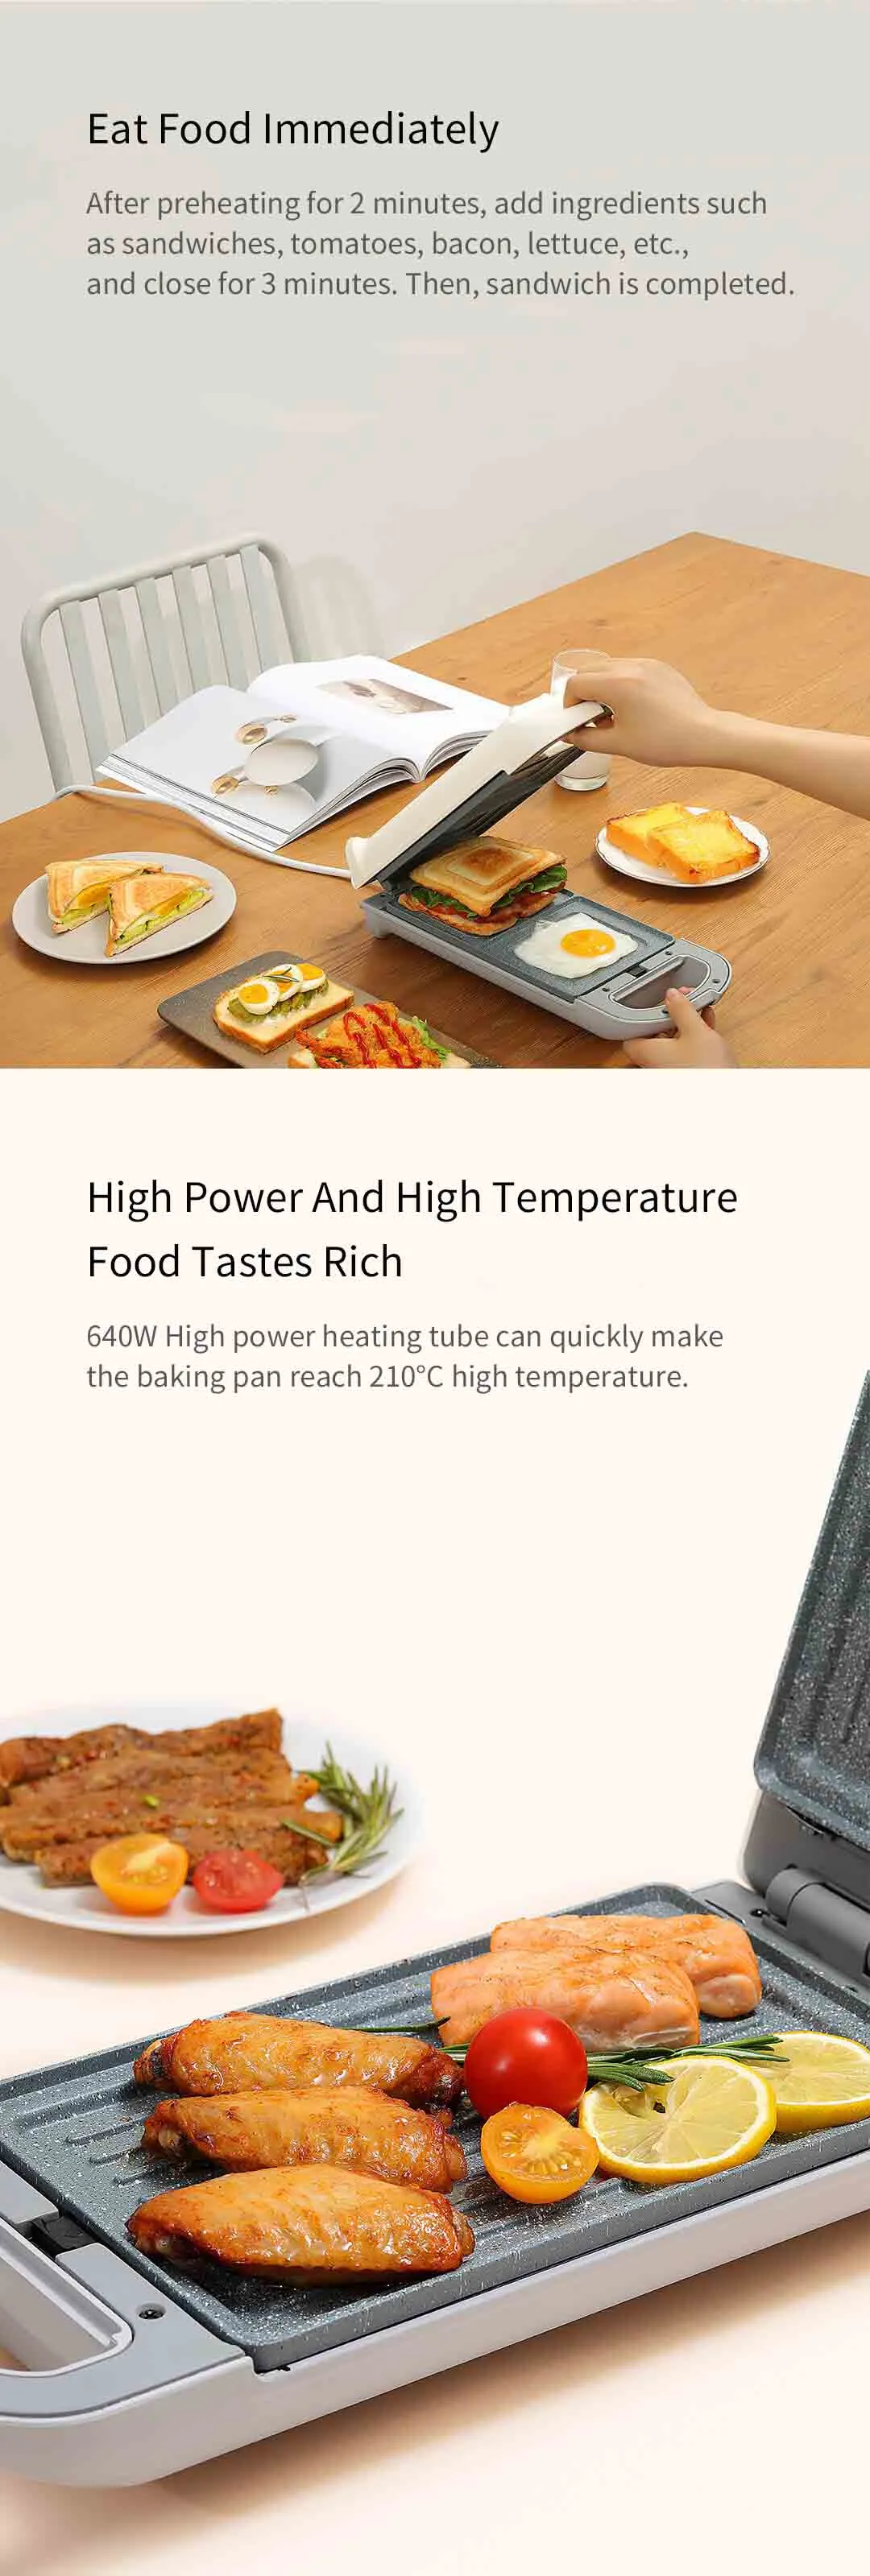 High power and temperature